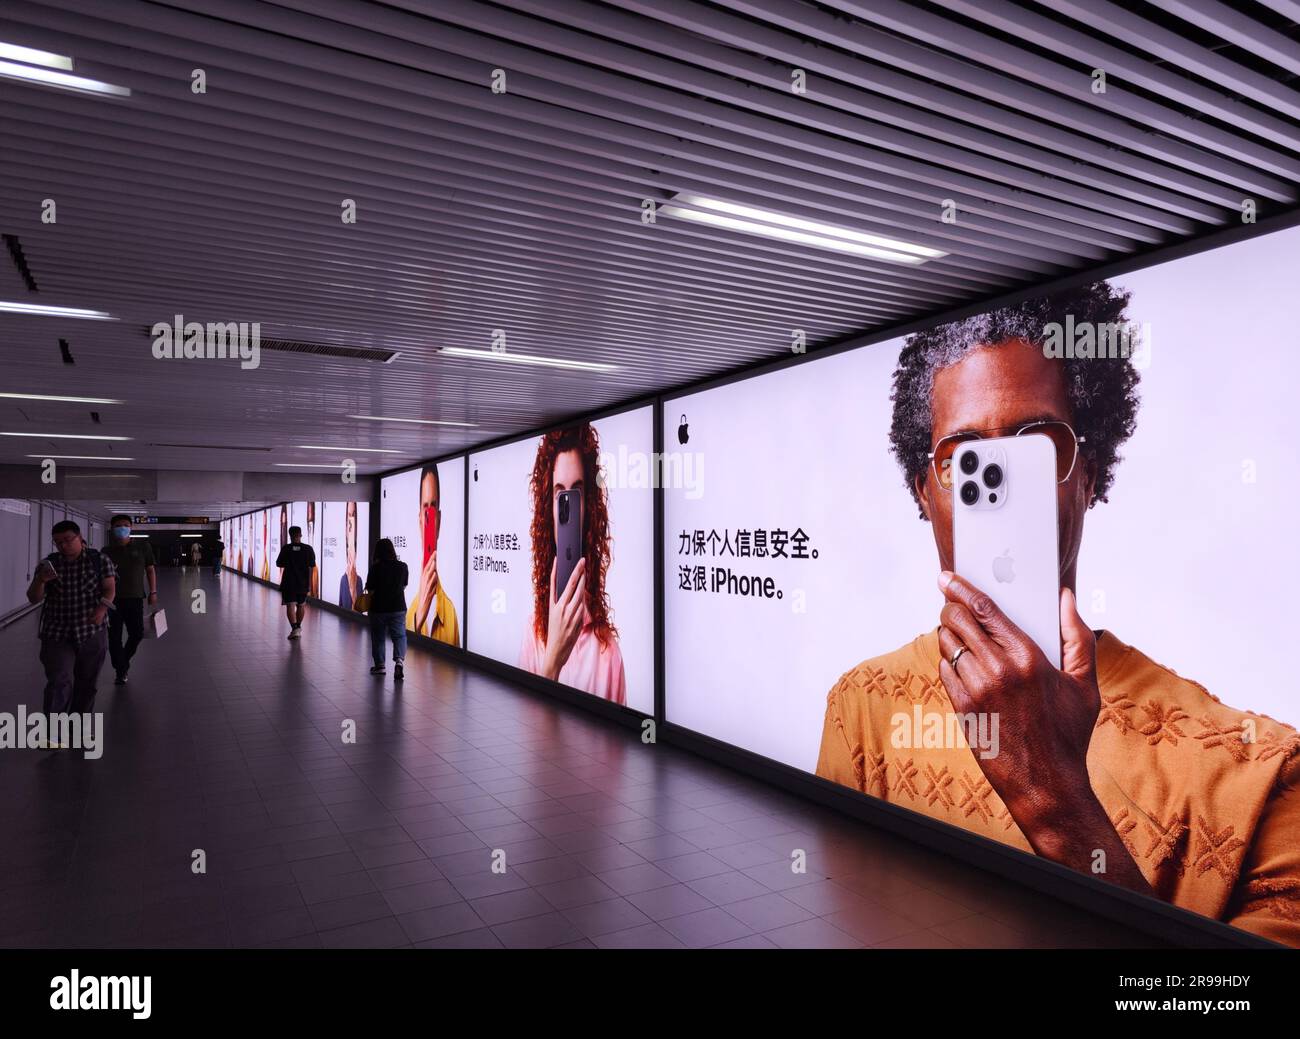 Apple's Privacy on iPhone subway ads at Shanghai Railway Station Stock Photo